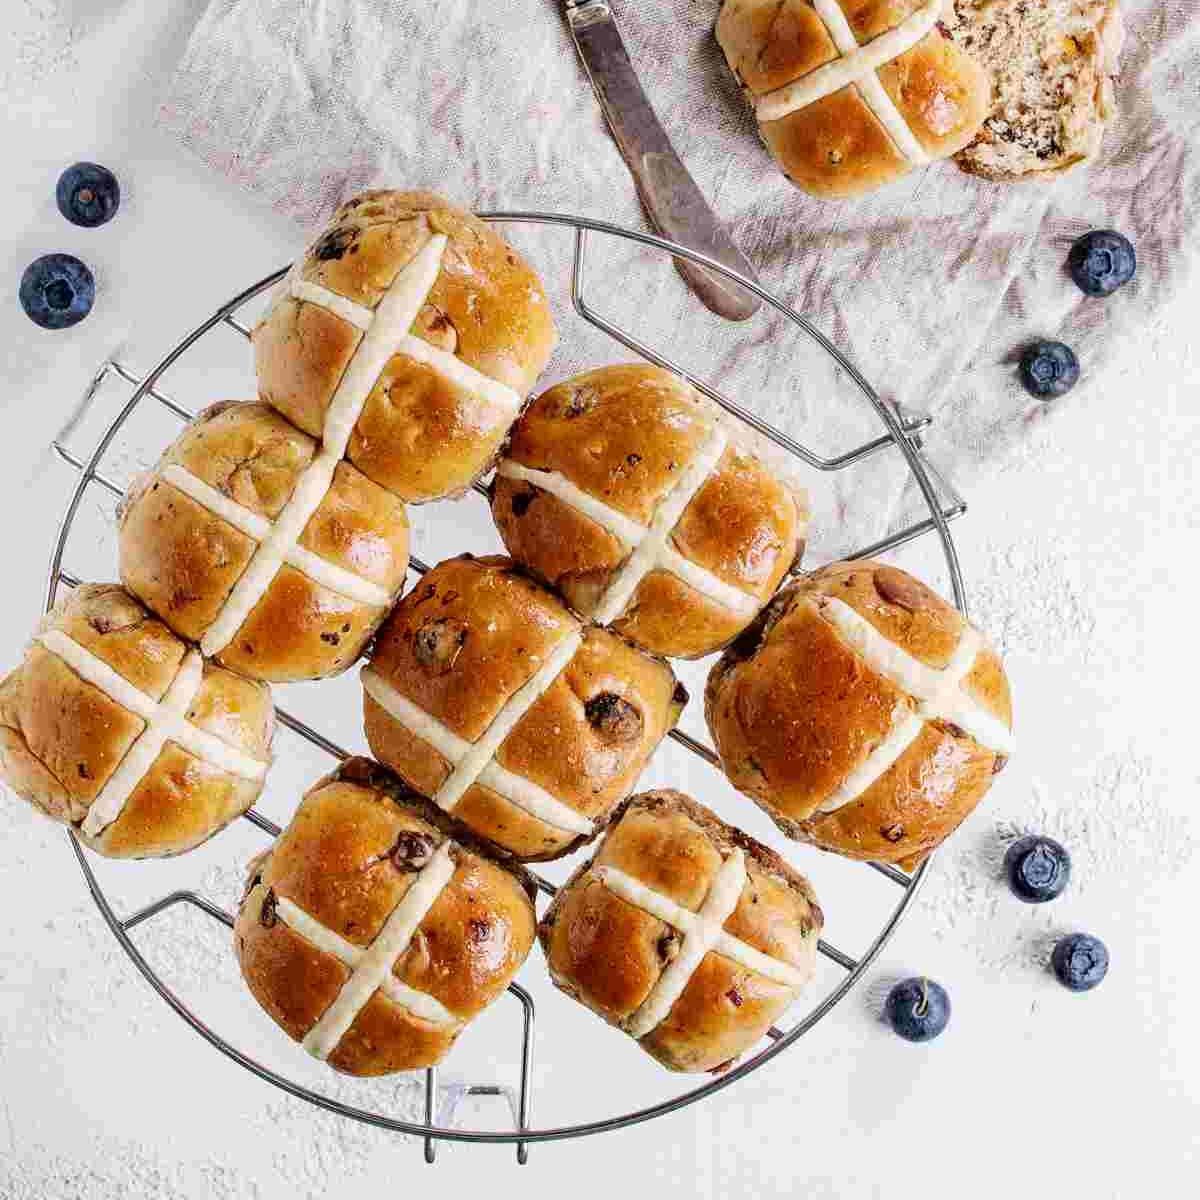 A cooling rack of eight hot cross buns on National Hot Cross Bun Day with one hot cross bun on a cloth beside it, all of them are surrounded by blueberries.